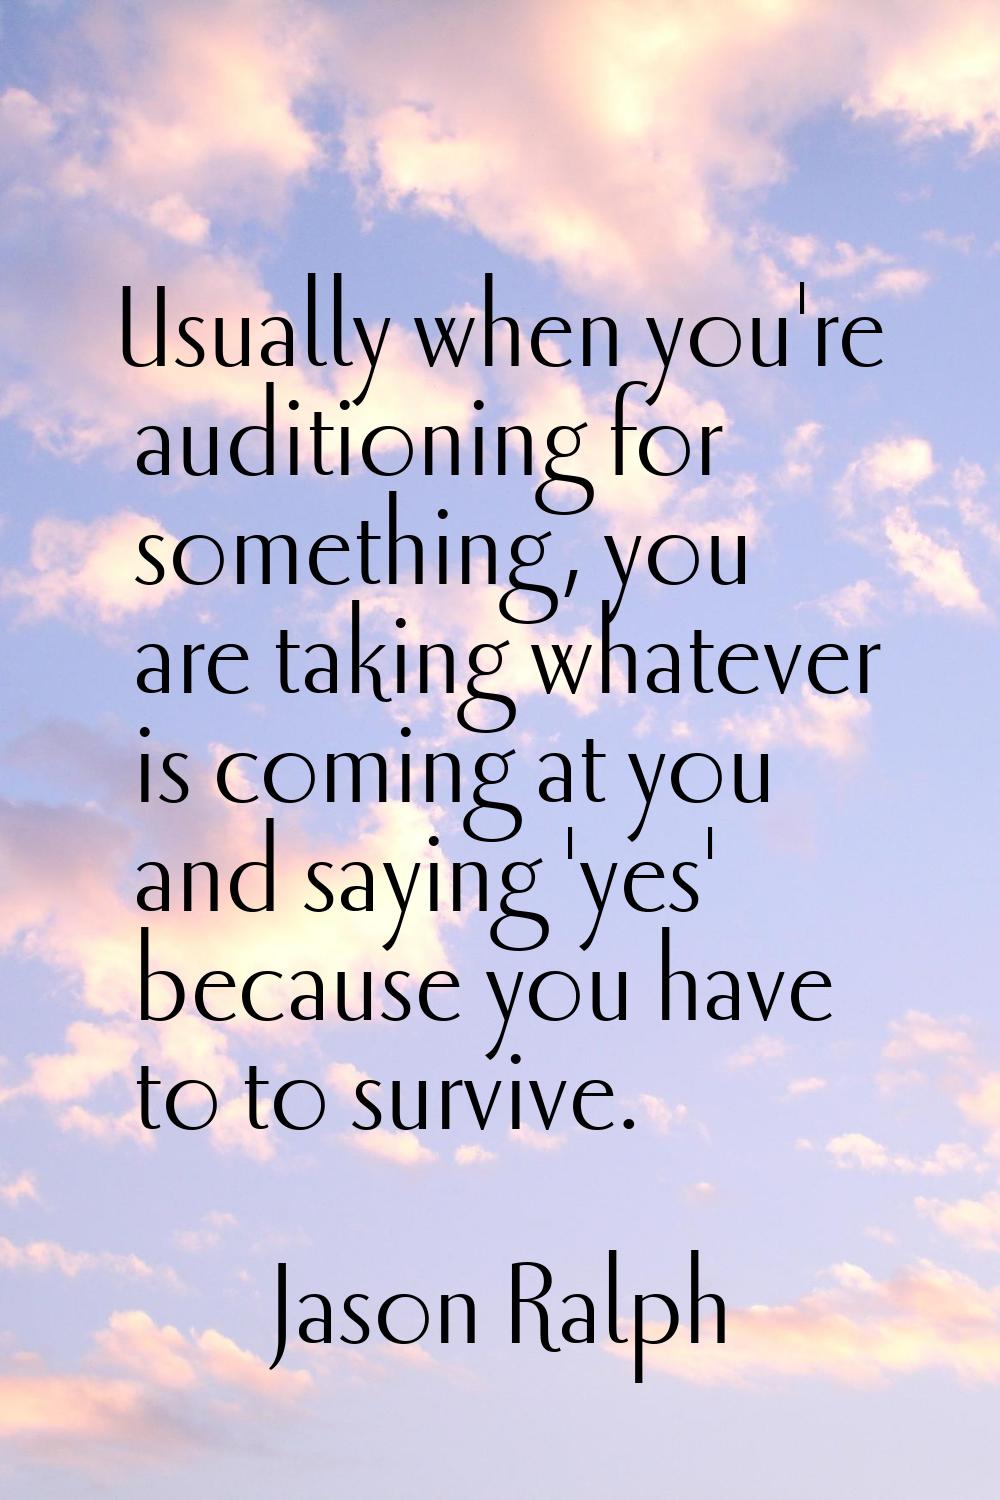 Usually when you're auditioning for something, you are taking whatever is coming at you and saying 